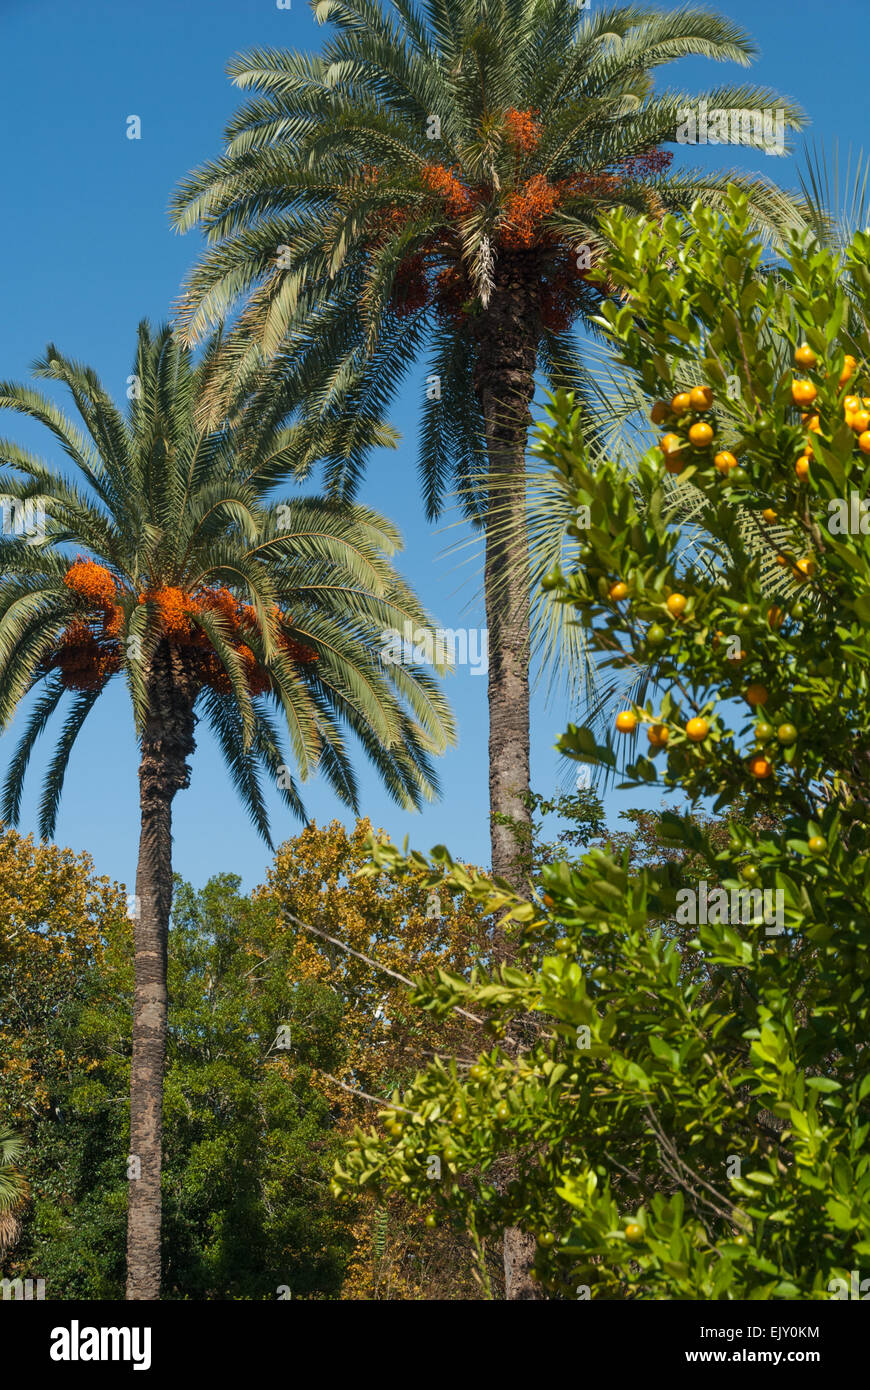 Florida palms and orange trees on the campus of Florida State University in Tallahassee, Florida, USA. Stock Photo